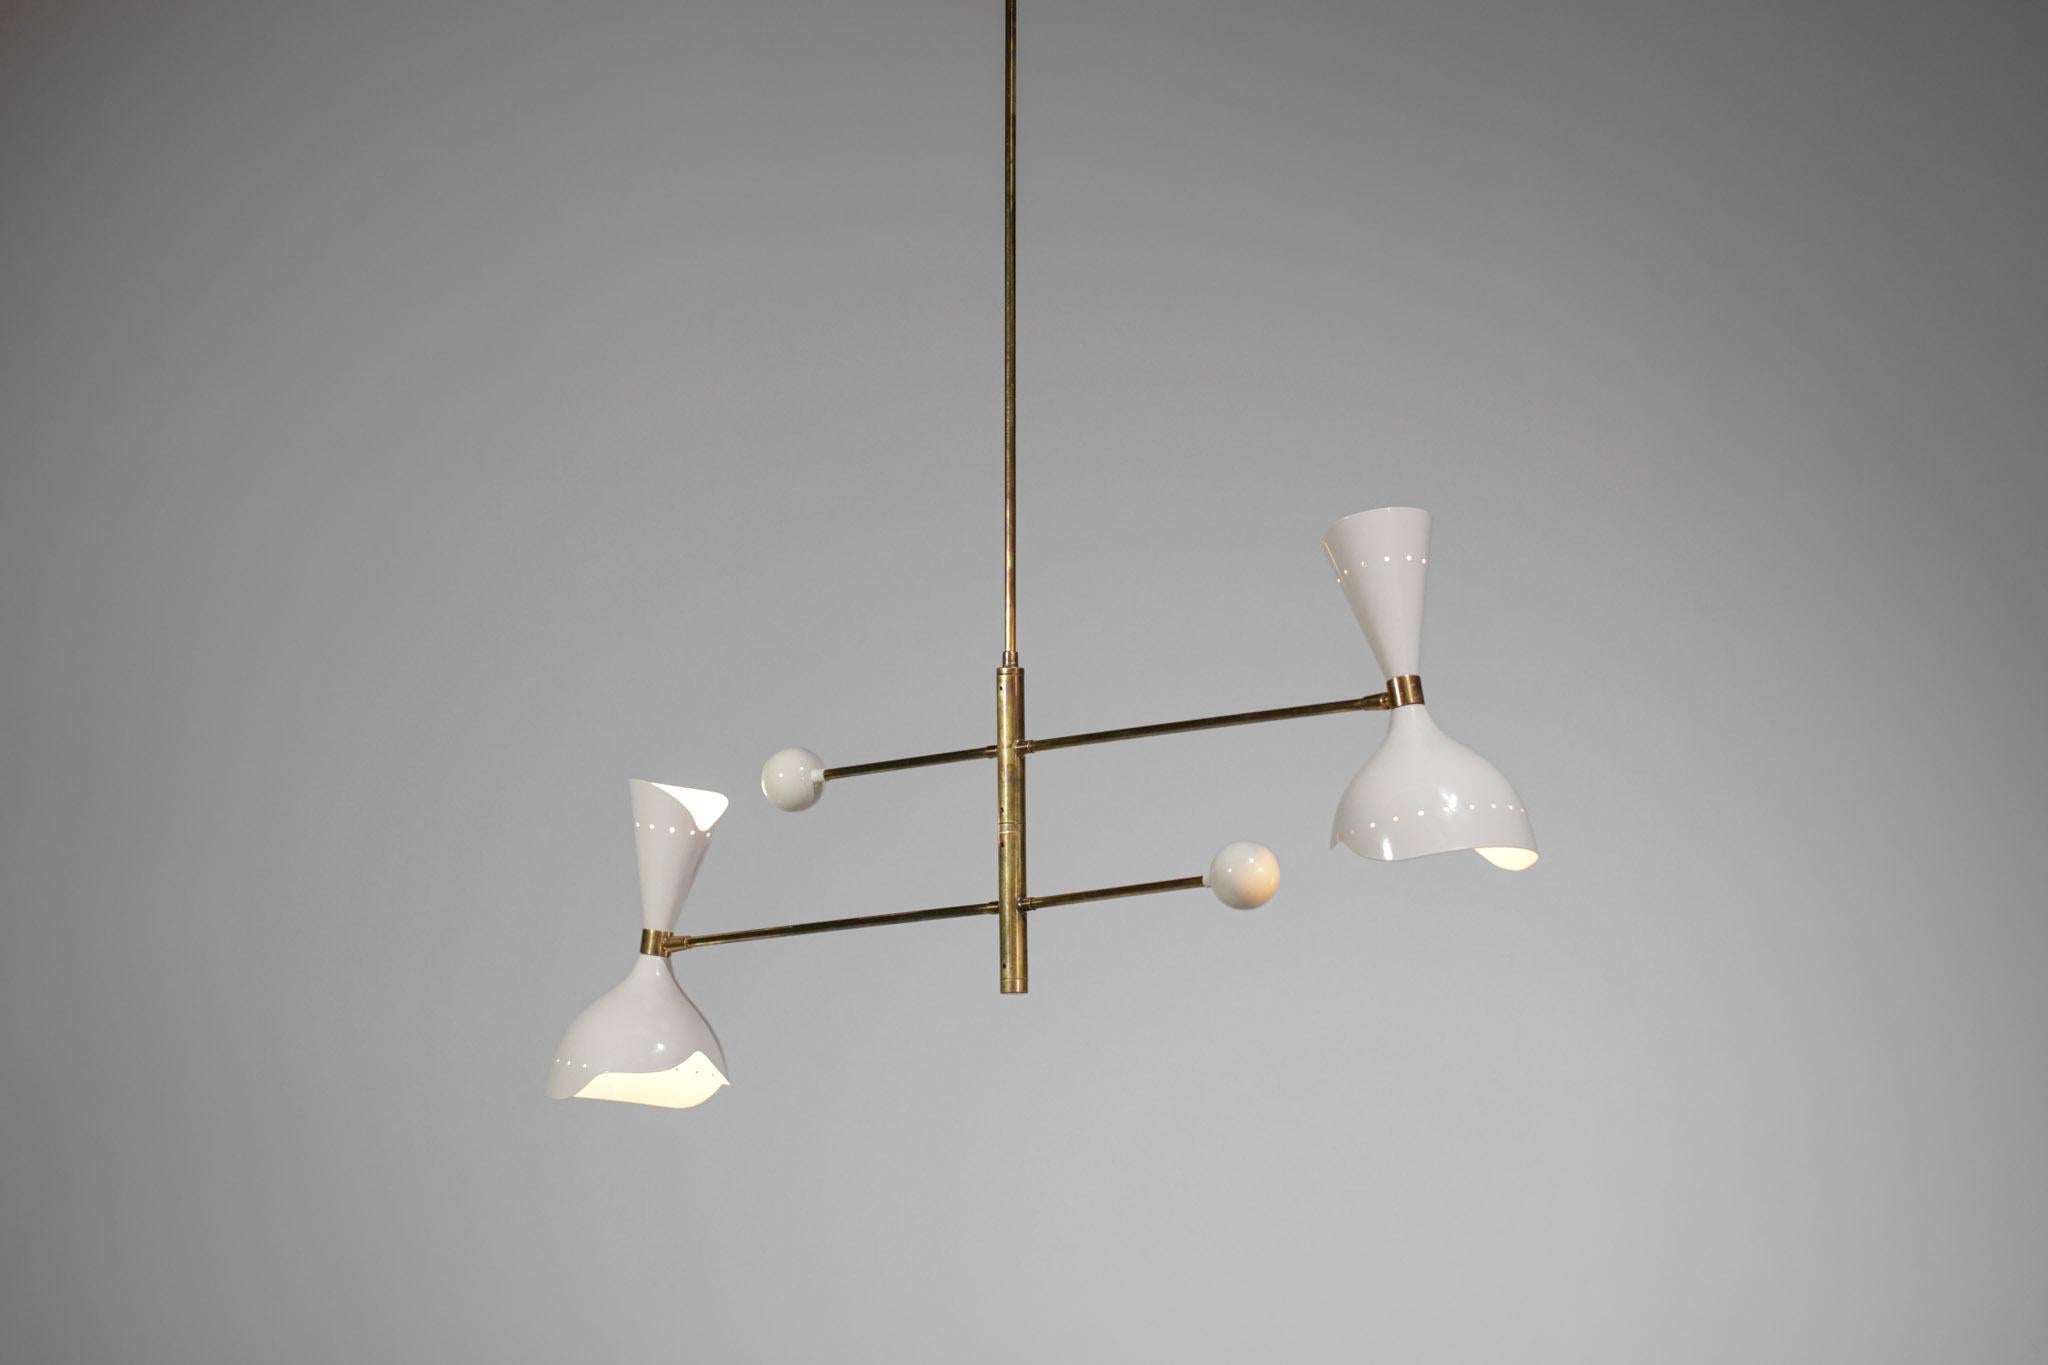 Modern Italian suspension lamp with original vintage design and a pendulum on each side, with the possibility to turn the arms 360 degrees. Structure and attachment cup in solid brass, shade in white lacquered metal. Recommended bulbs are E14.